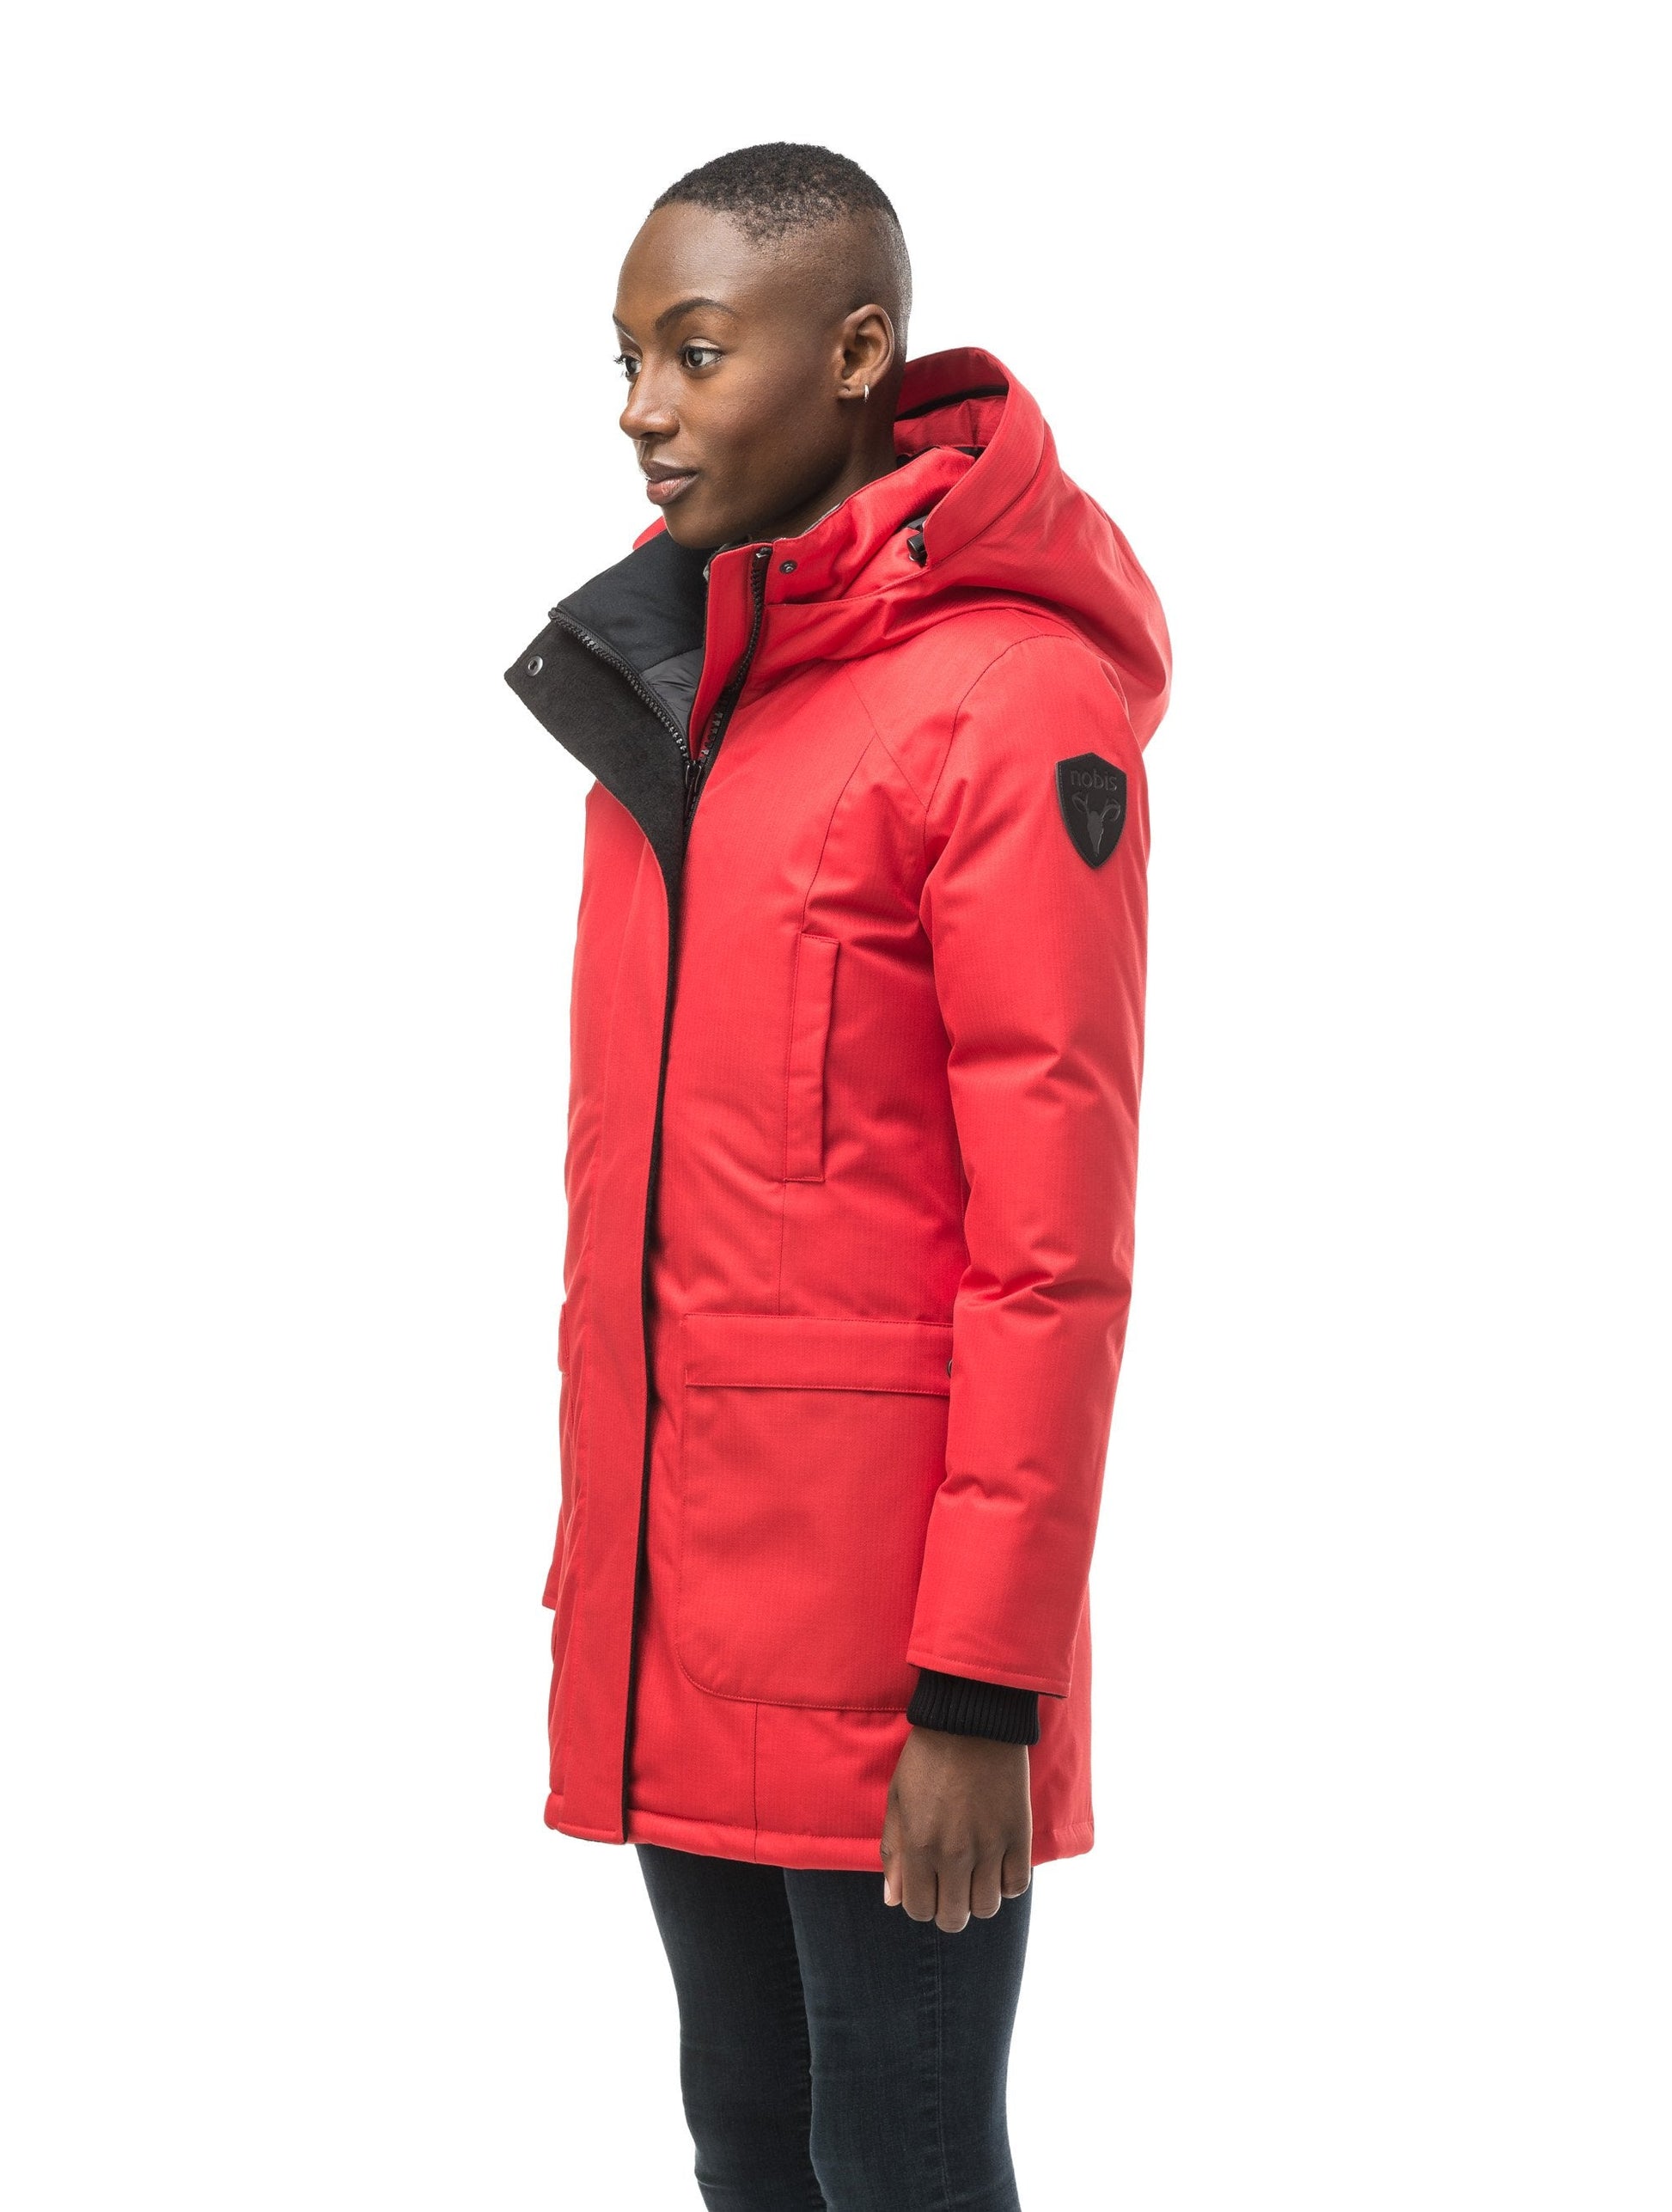 Women's down filled parka that sits just below the hip with a clean look and two hip patch pockets in CH Red